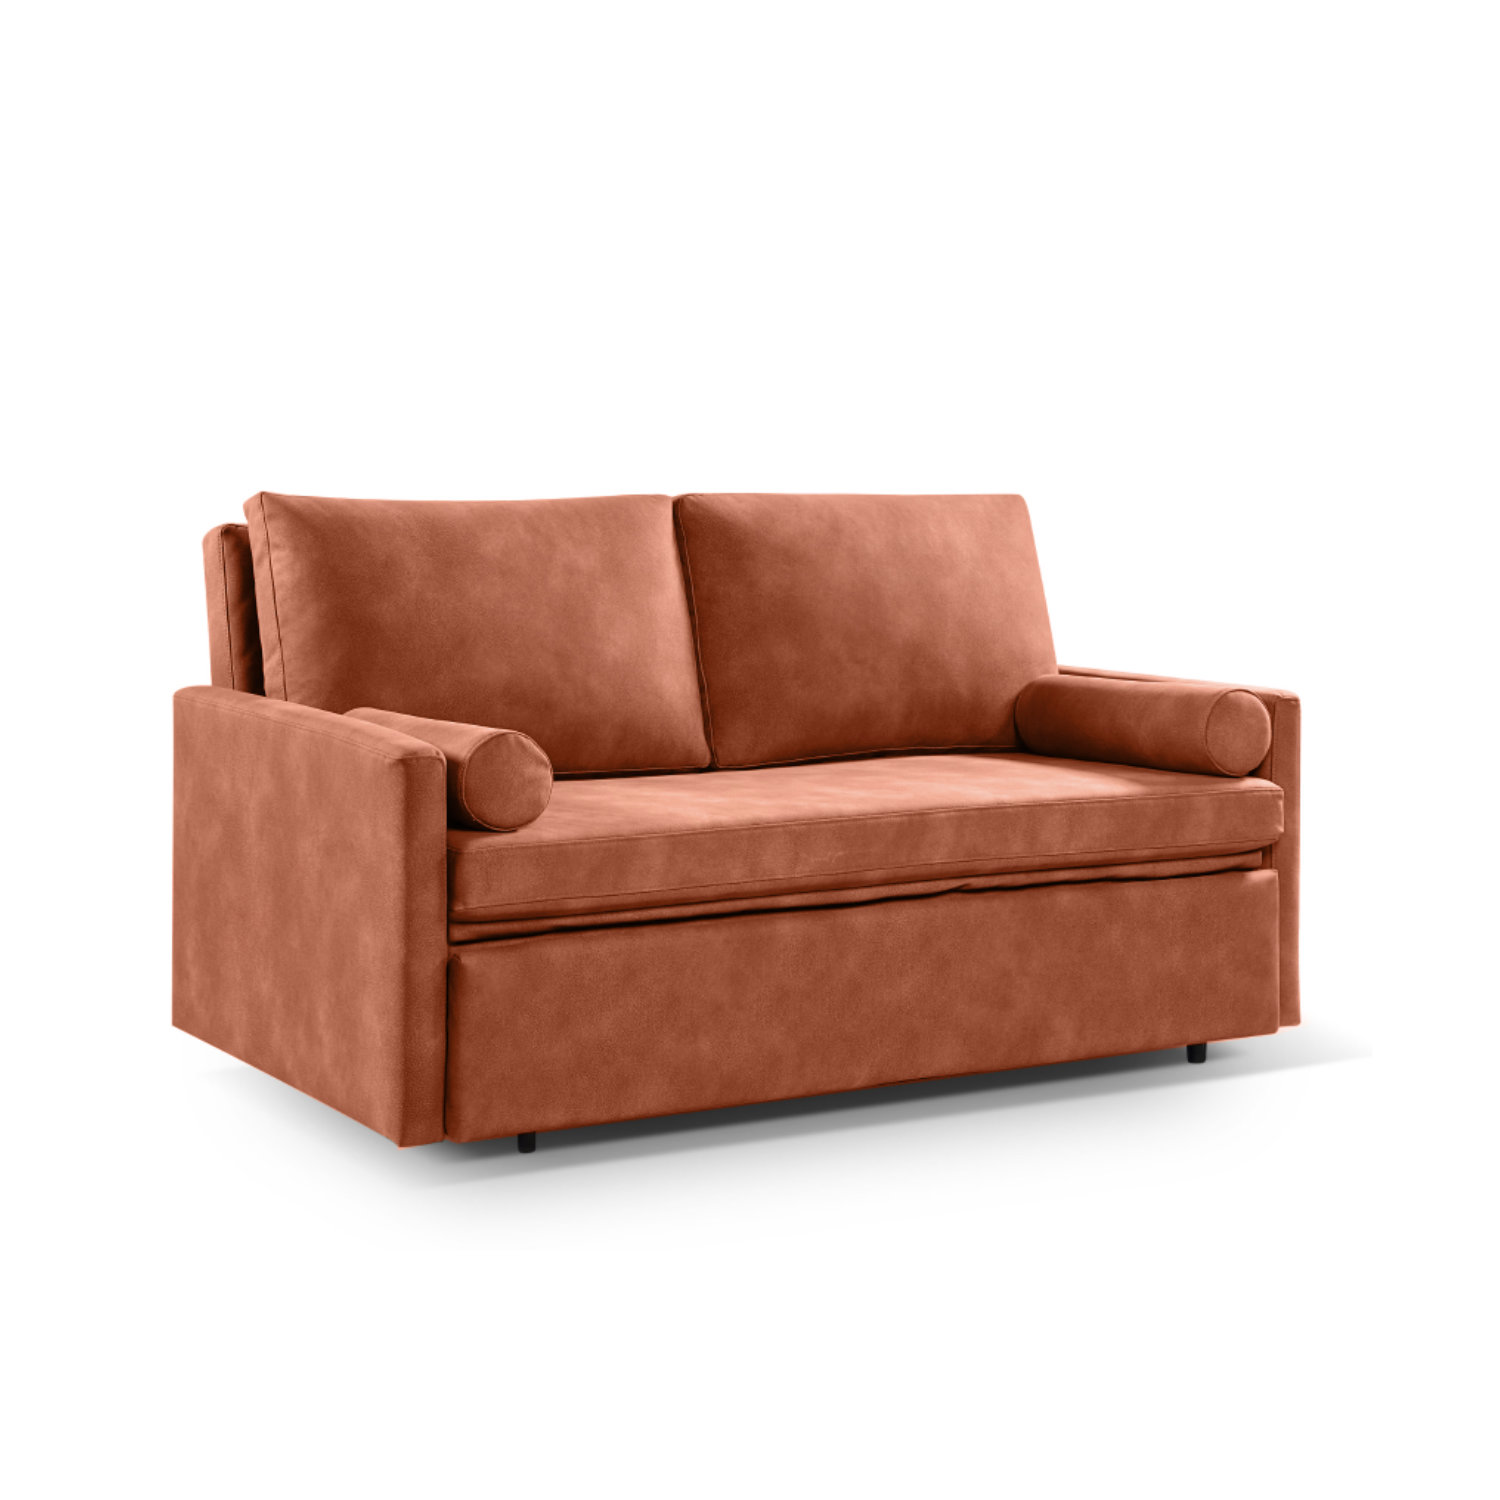 Harmony Sofa Bed Queen Eco Leather, How Much Does An American Leather Sleeper Sofa Weigh